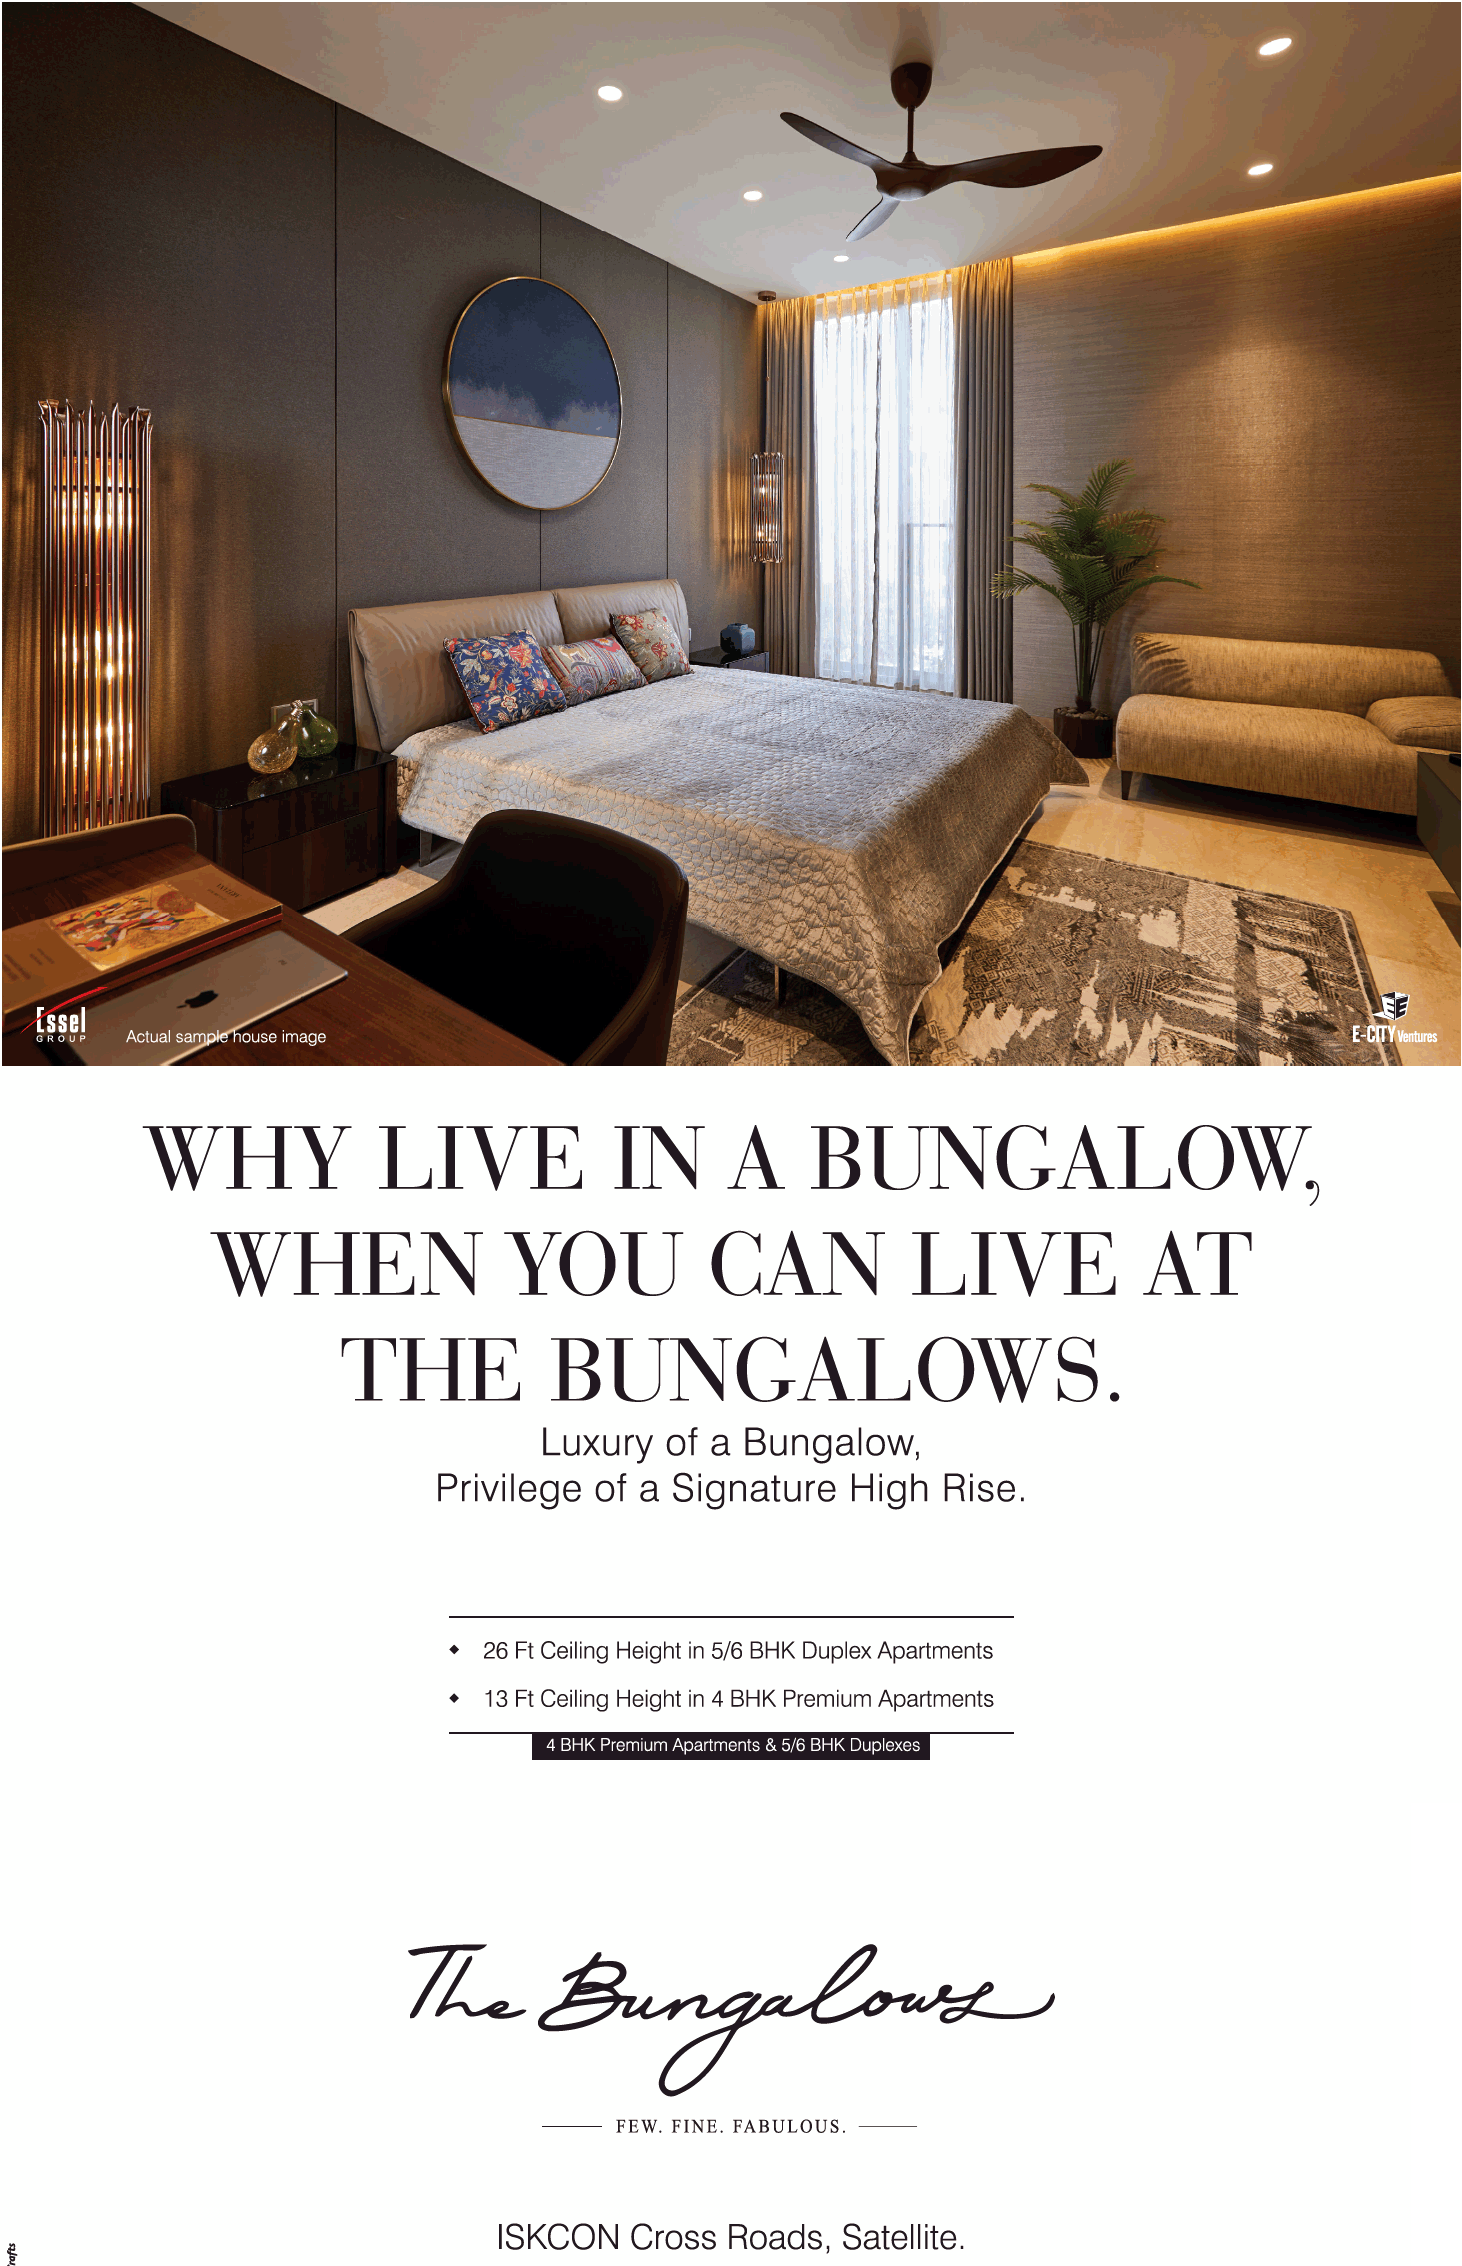 4 BHK premium apartments at The Bungalows in Ahmedabad Update